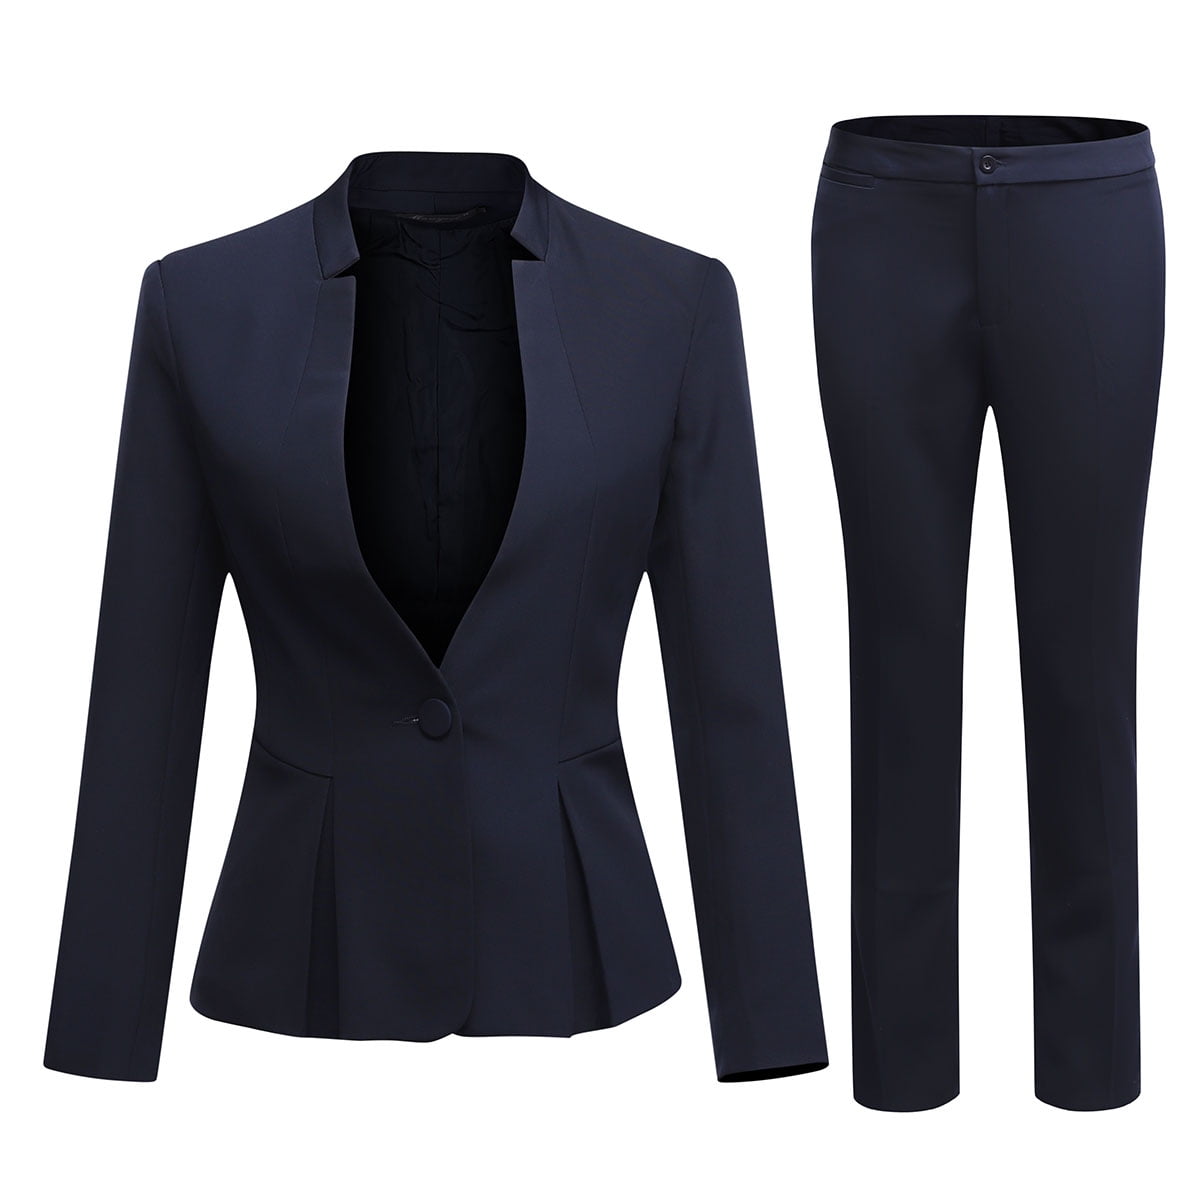 Youthup Women's Business Office 1 Button Blazer Jacket and Pants Suit ...